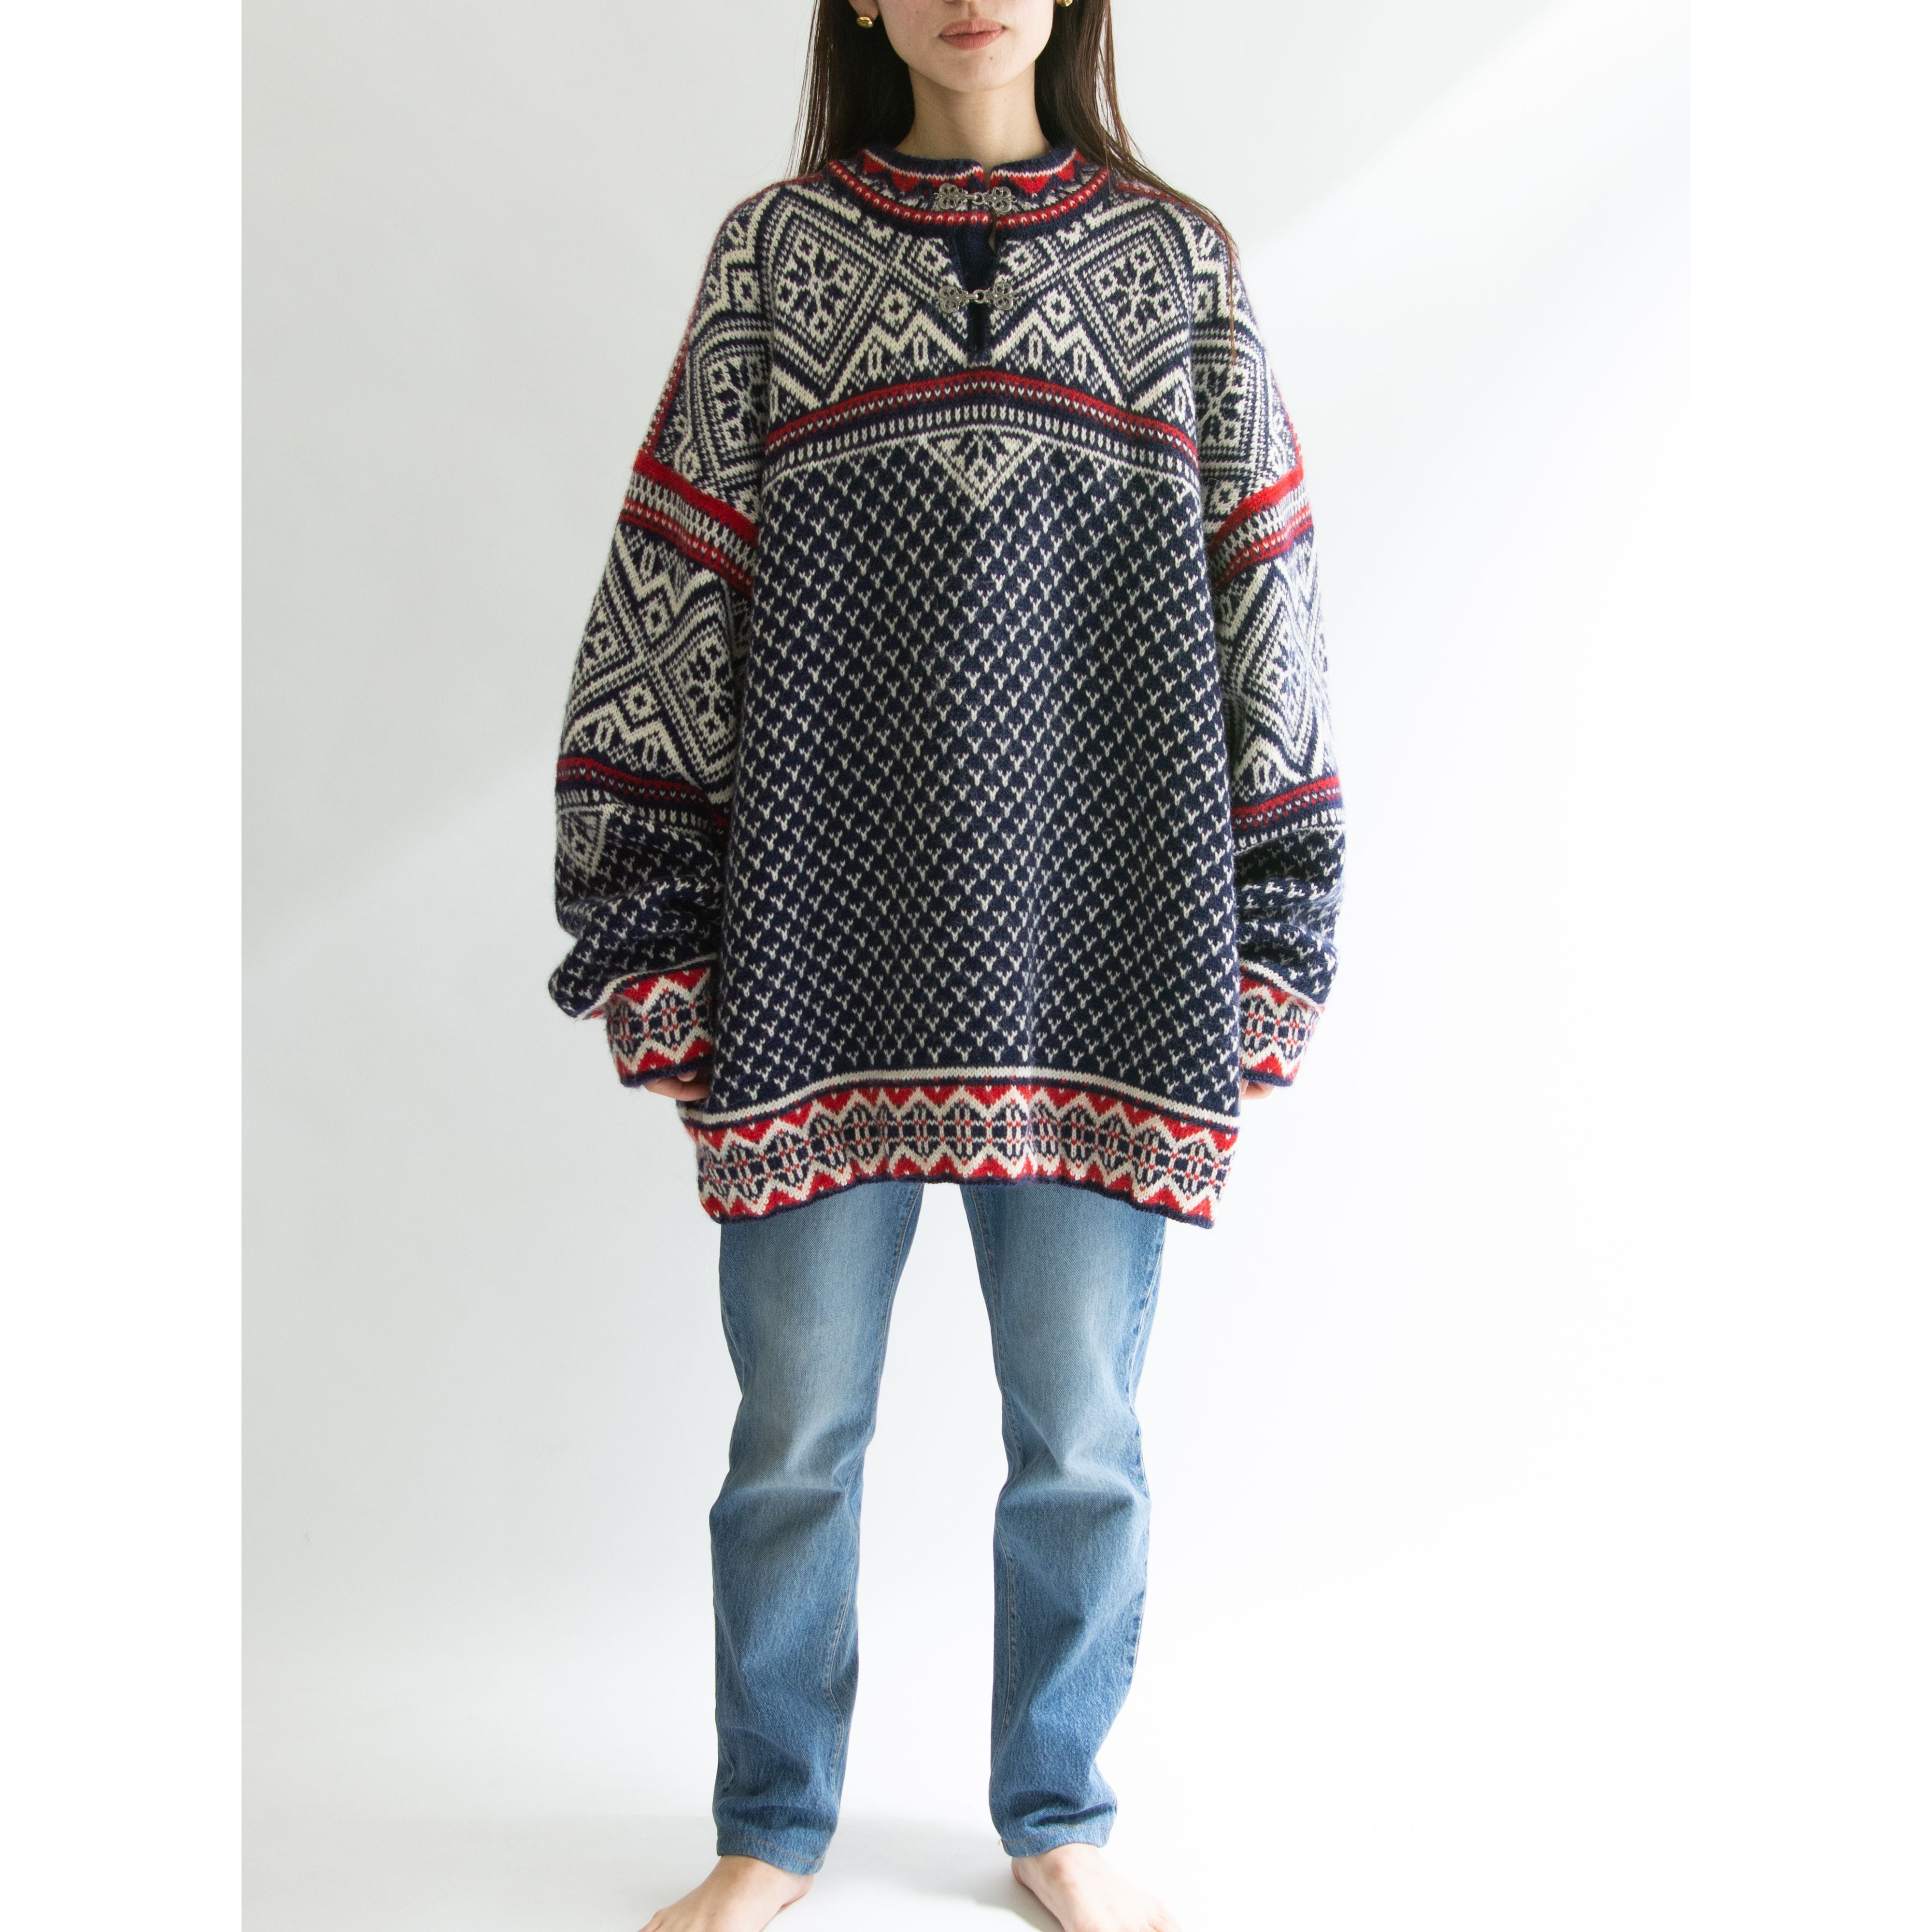 DALE OF NORWAY】Made in Norway 100% wool Nordic sweater 